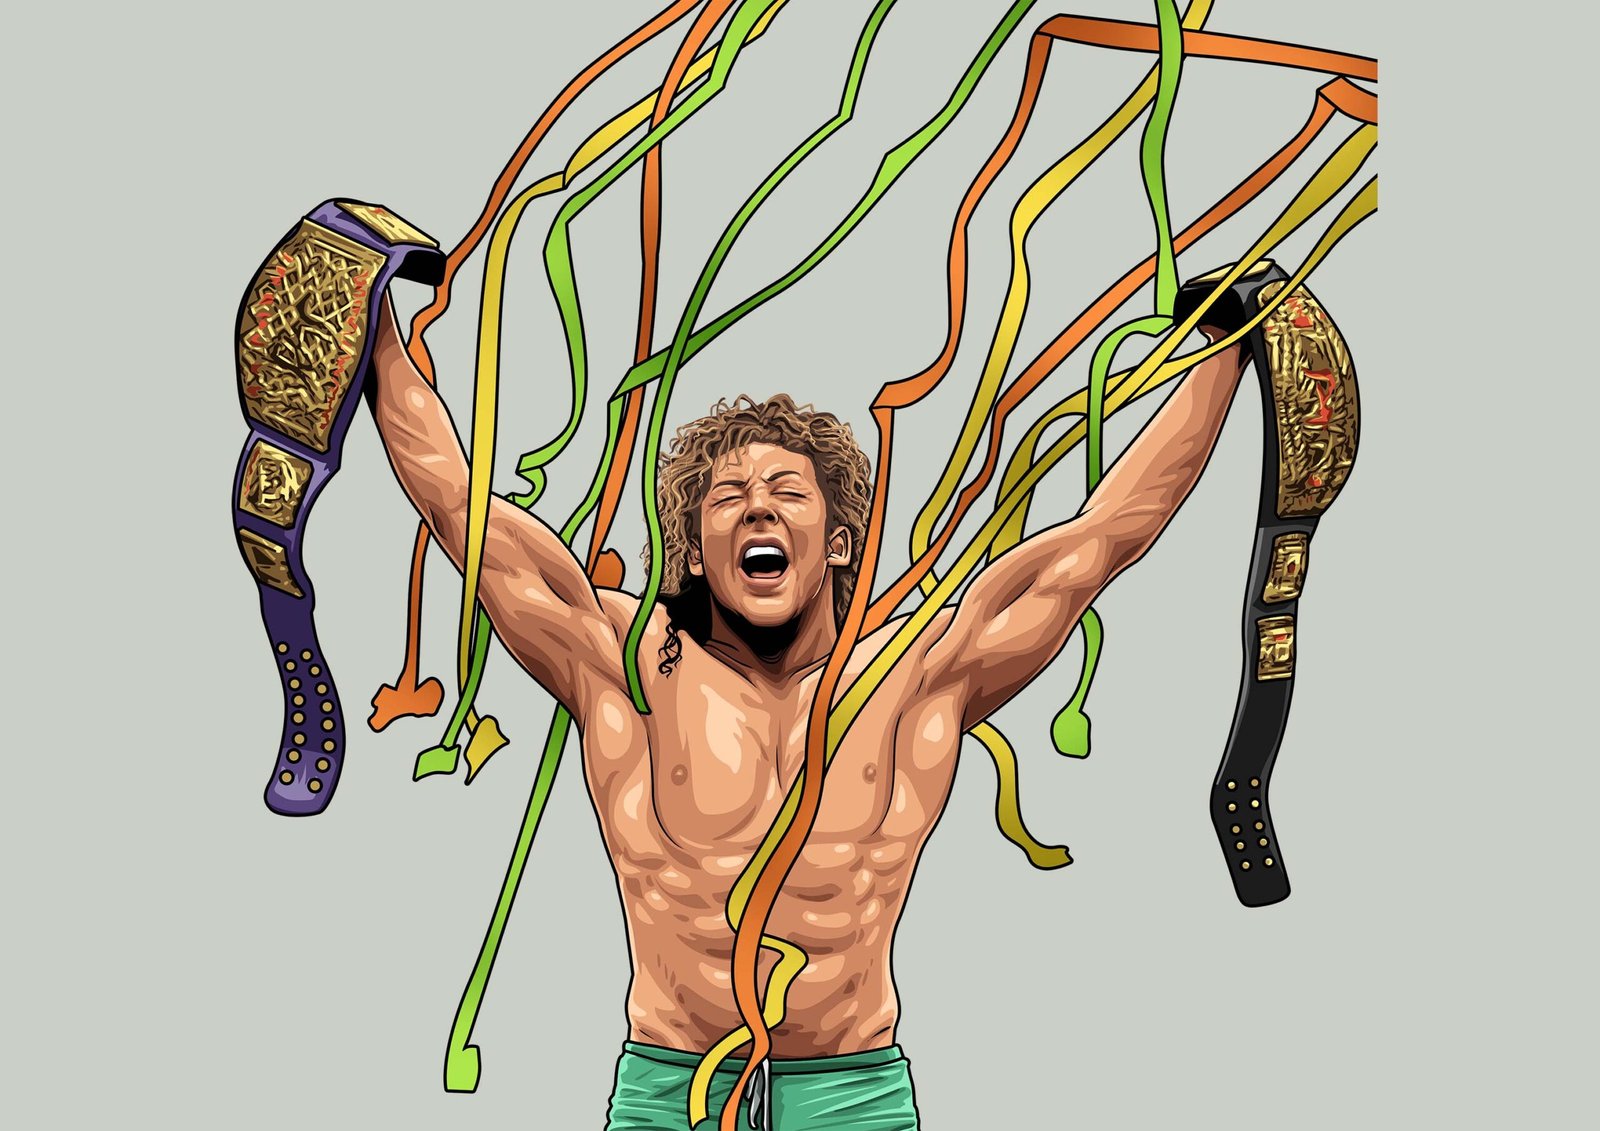 Q&A with Kenny Omega, his career journey and Japanese culture